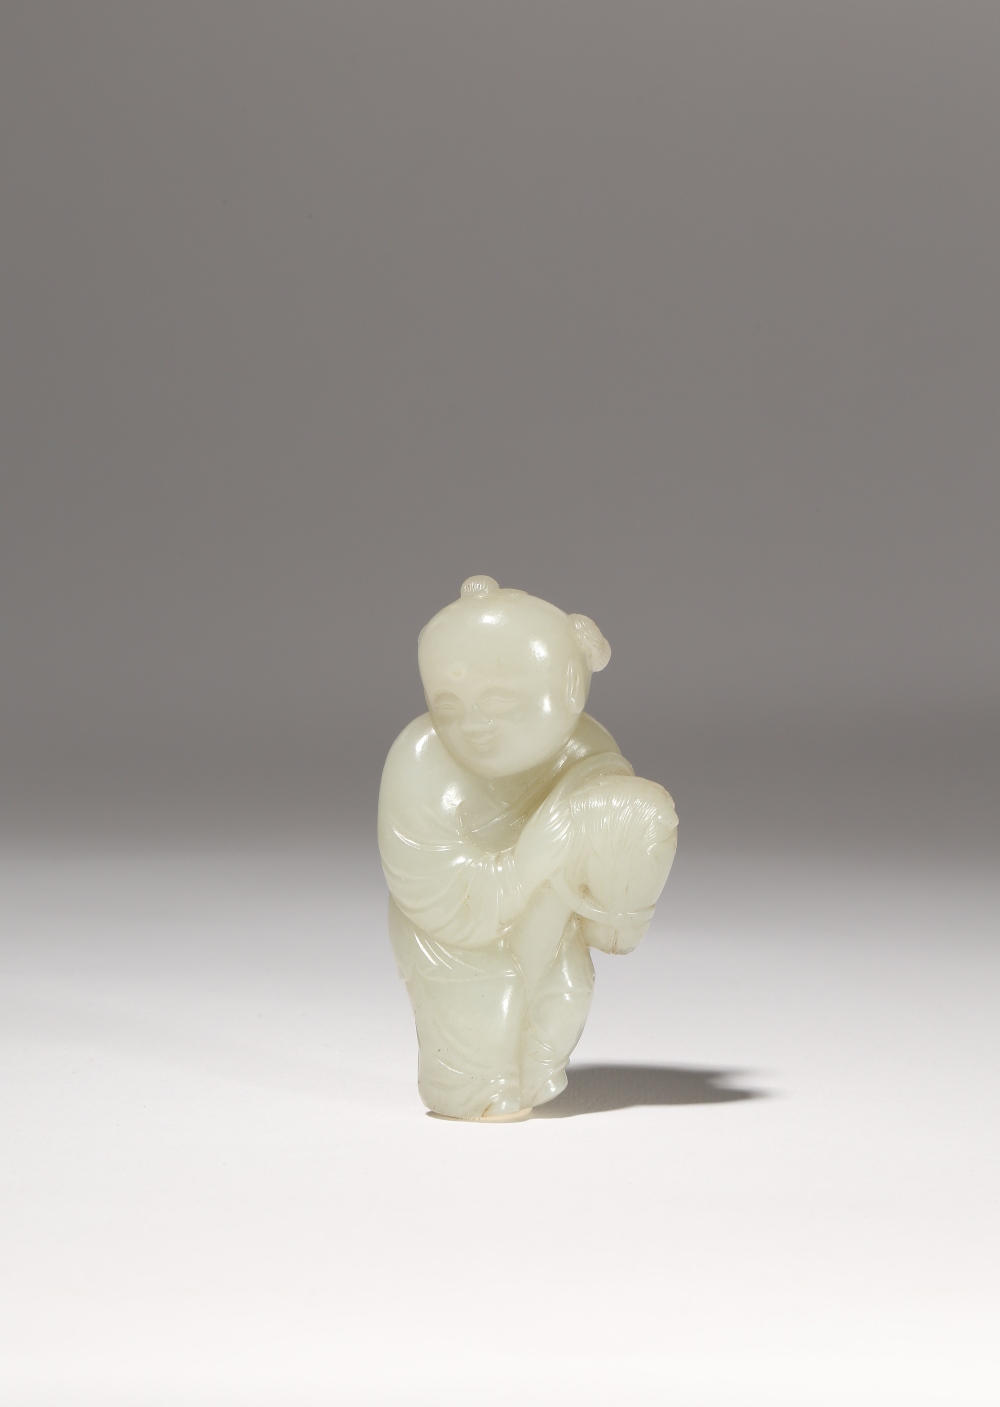 A CHINESE PALE CELADON JADE 'BOY' PENDANT QING DYNASTY OR LATER Carved as a young boy riding a hobby